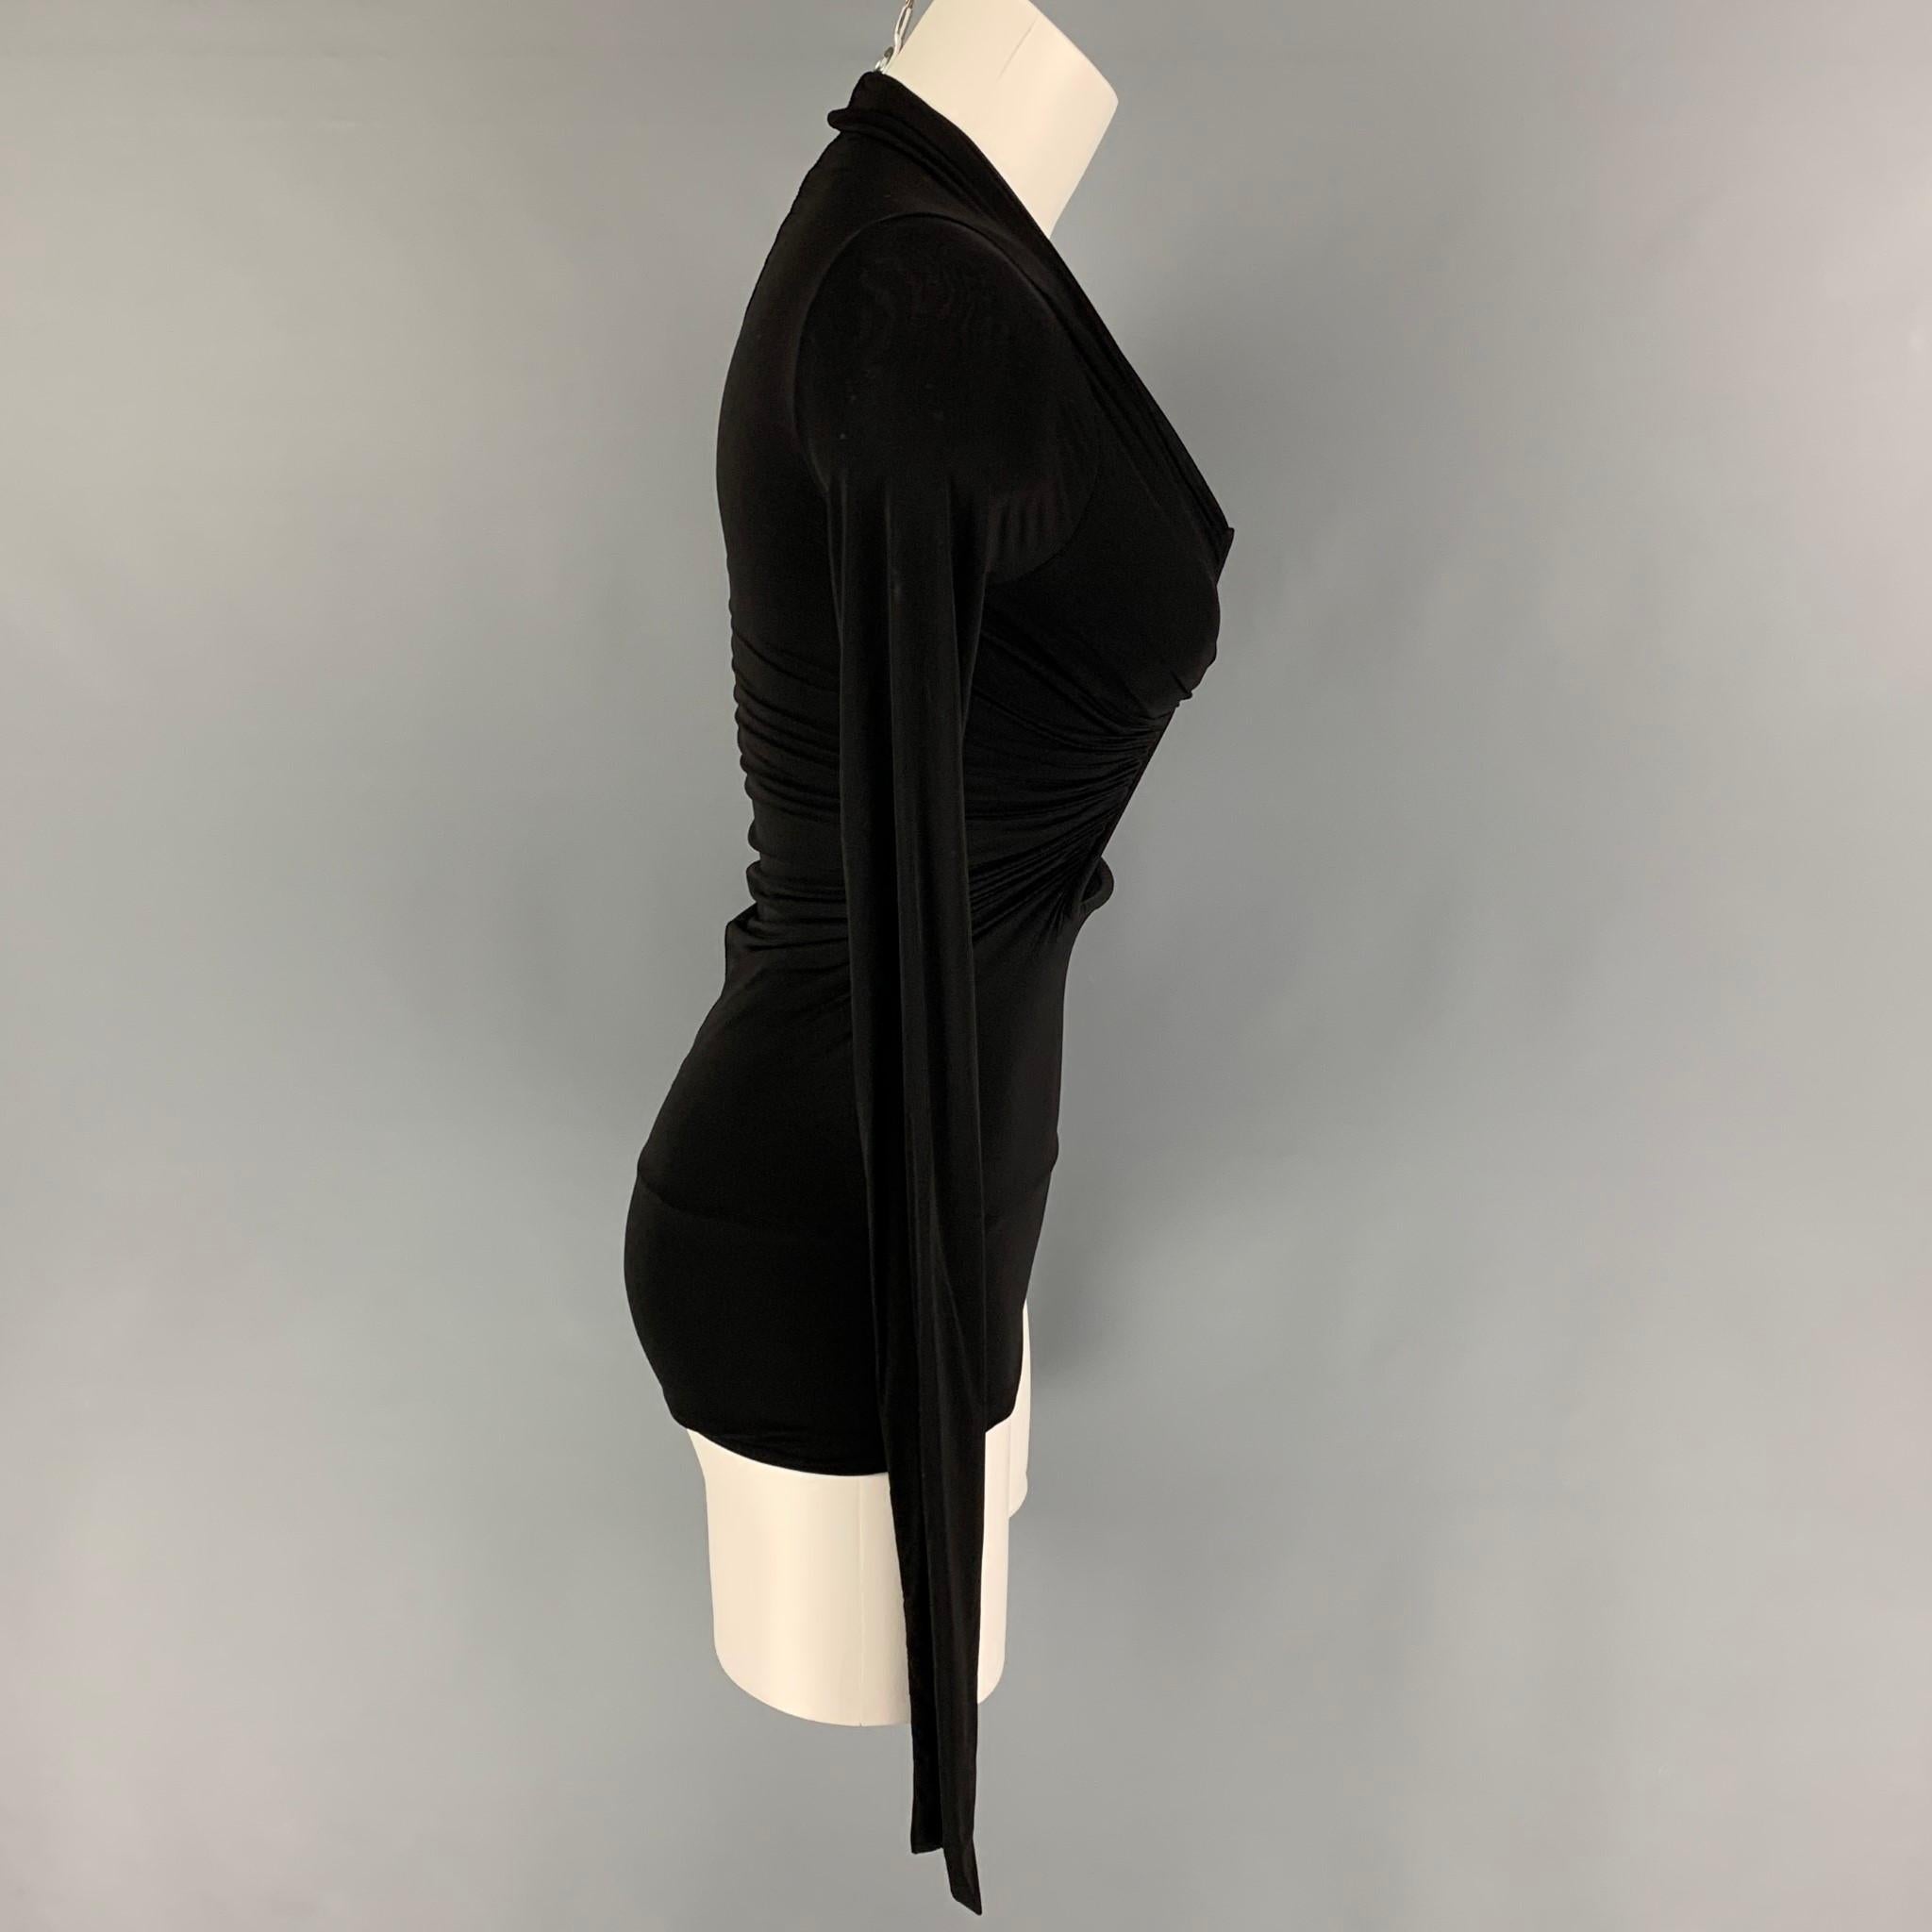 RICK OWENS FOGACHINE SS 22 blouse comes in a black stretch polyamide featuring a sculptural cut-out, long sleeves, and a ruched design.

Excellent Pre-Owned Condition.
Marked: 4
Original Retail Price: $1,065.00

Measurements:

Shoulder: 10 in.
Bust: